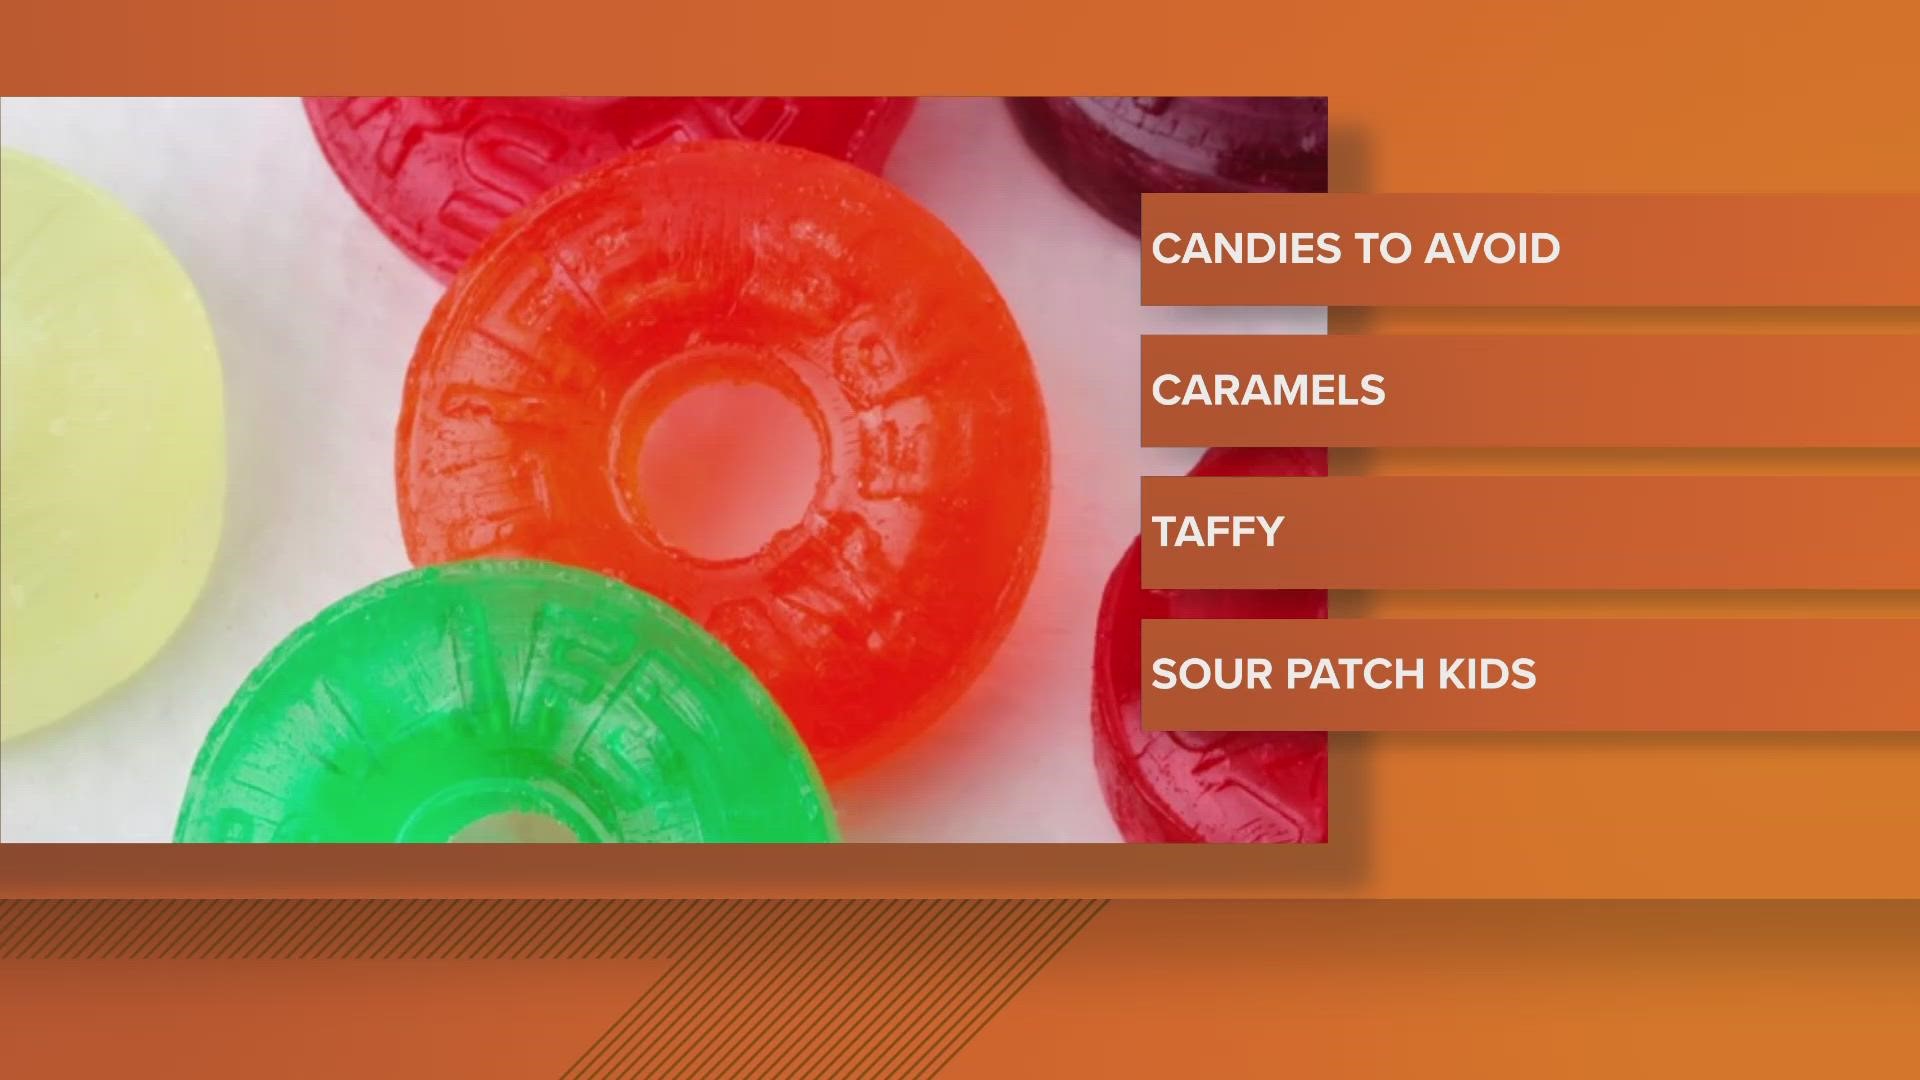 February is National Children’s Dental Health Month and dentists have a warning about the worst candies for kids.